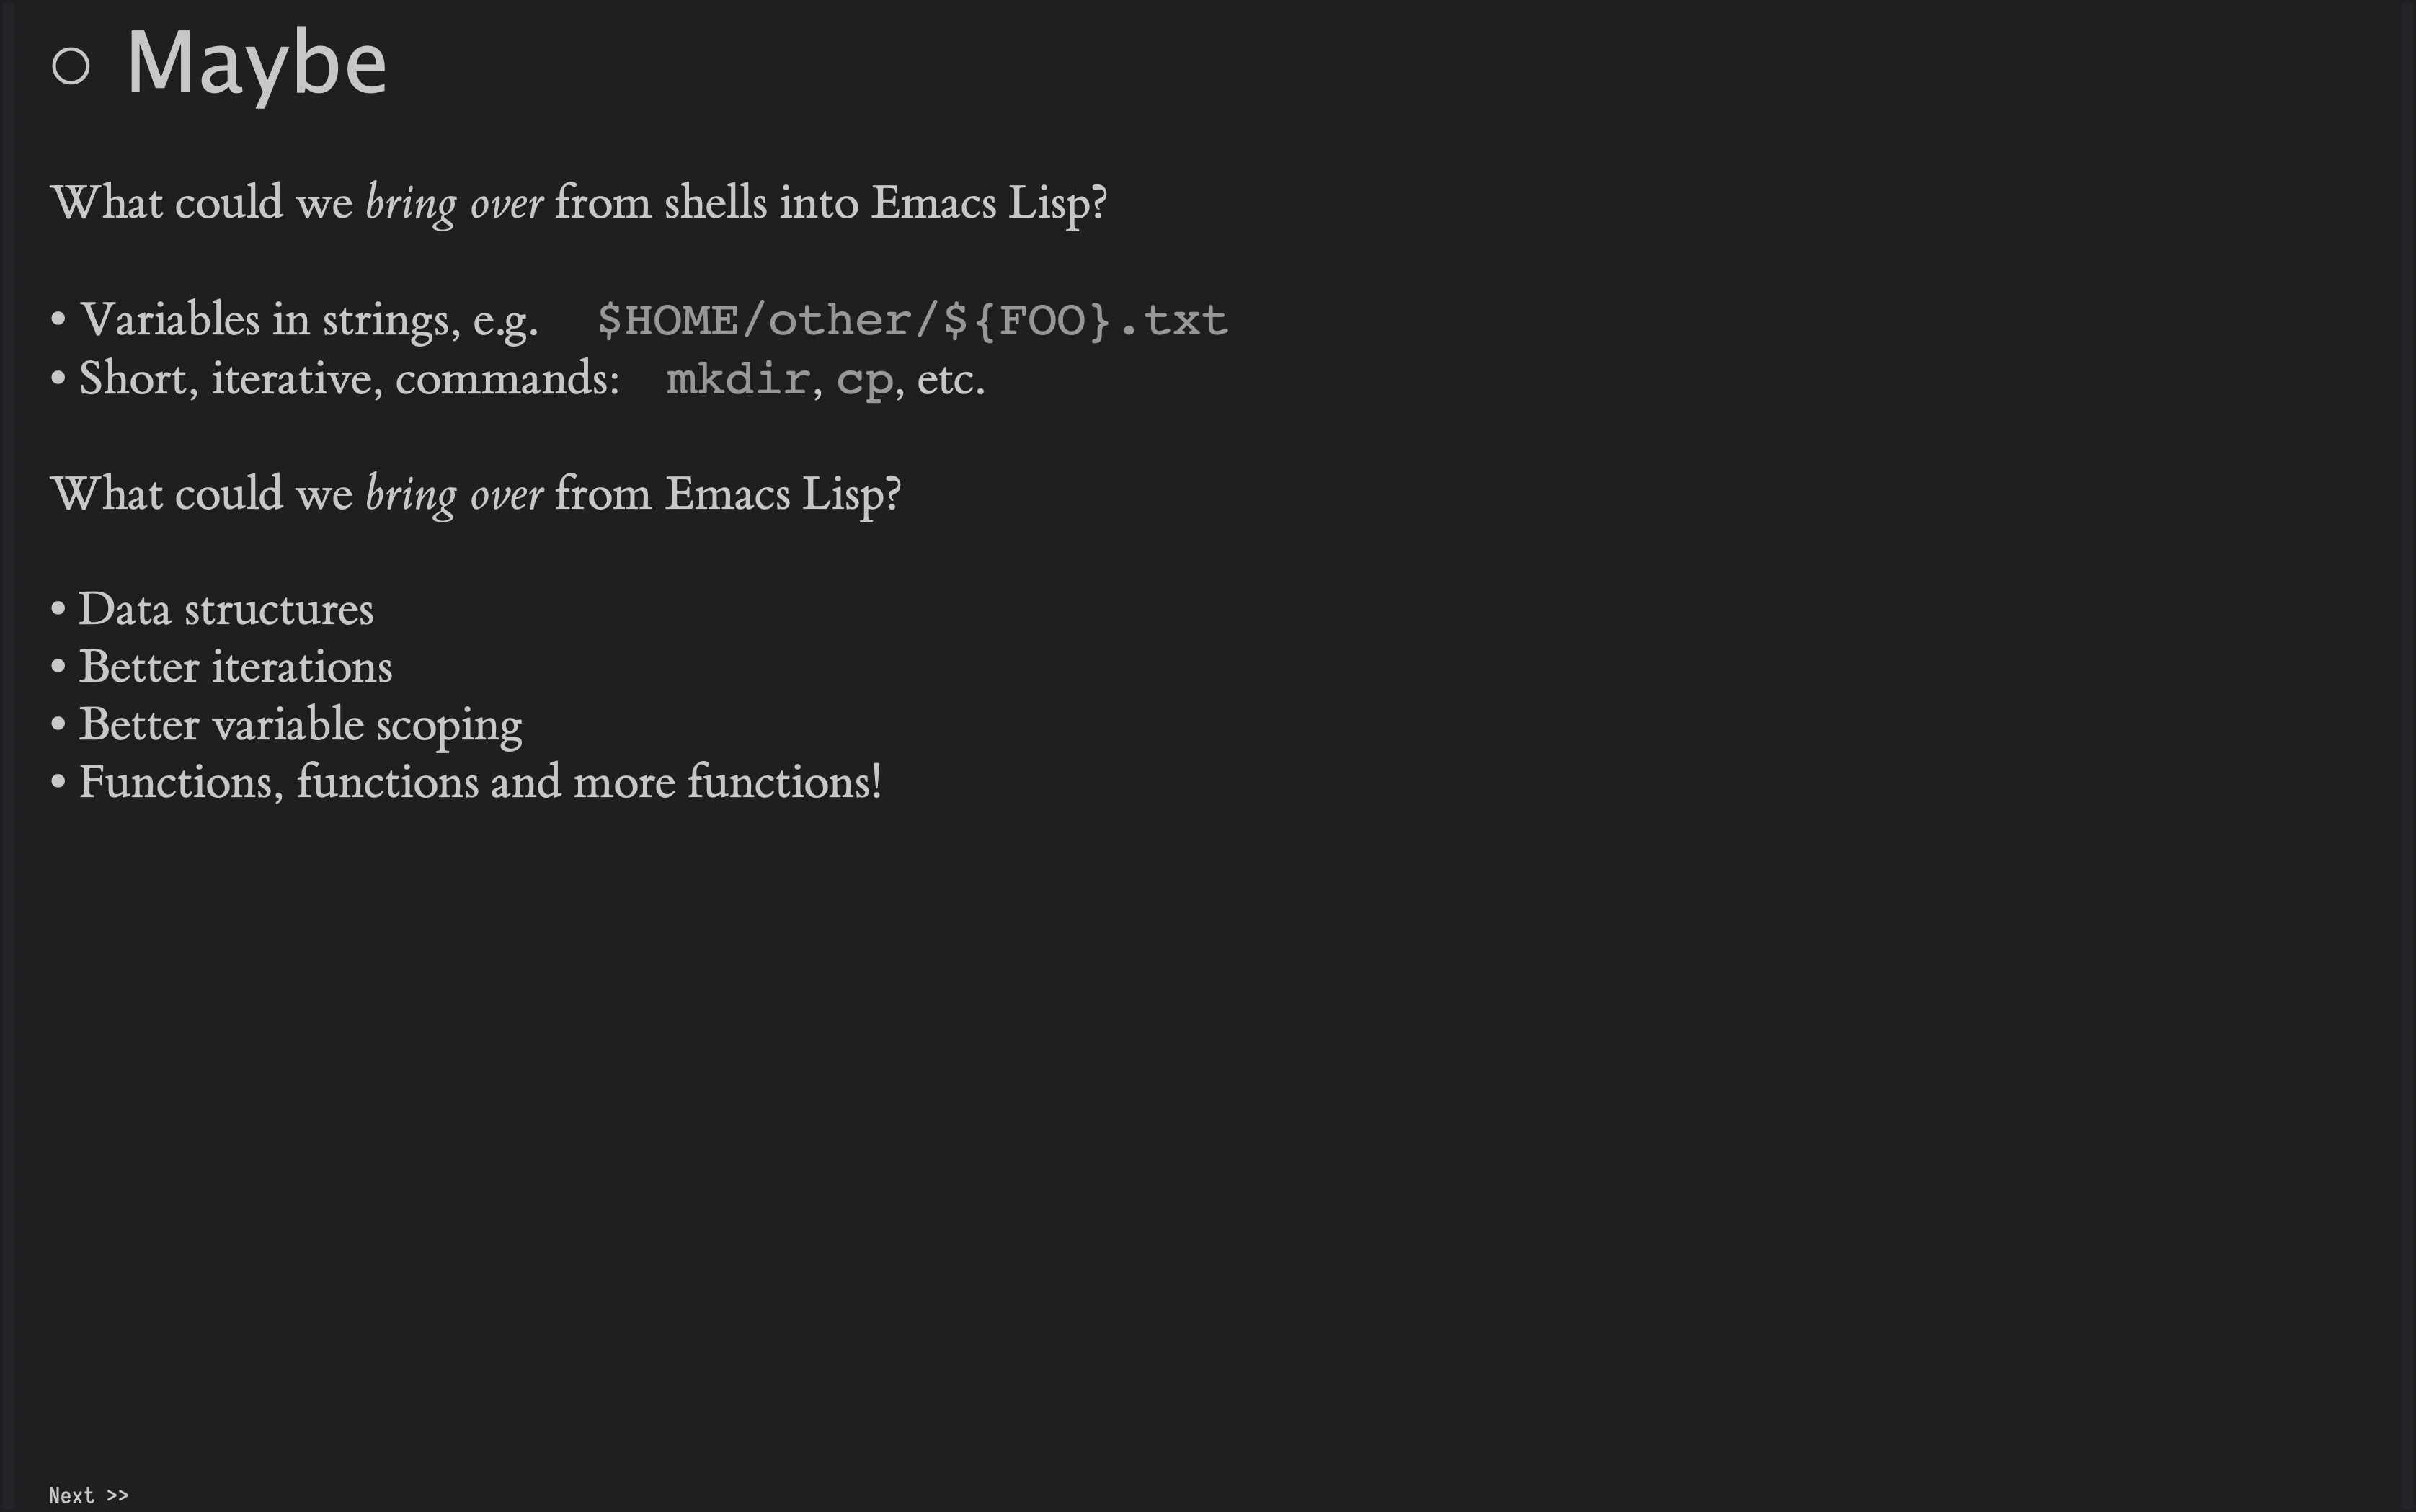 Maybe we could bring the good parts of shell scripts into Emacs.